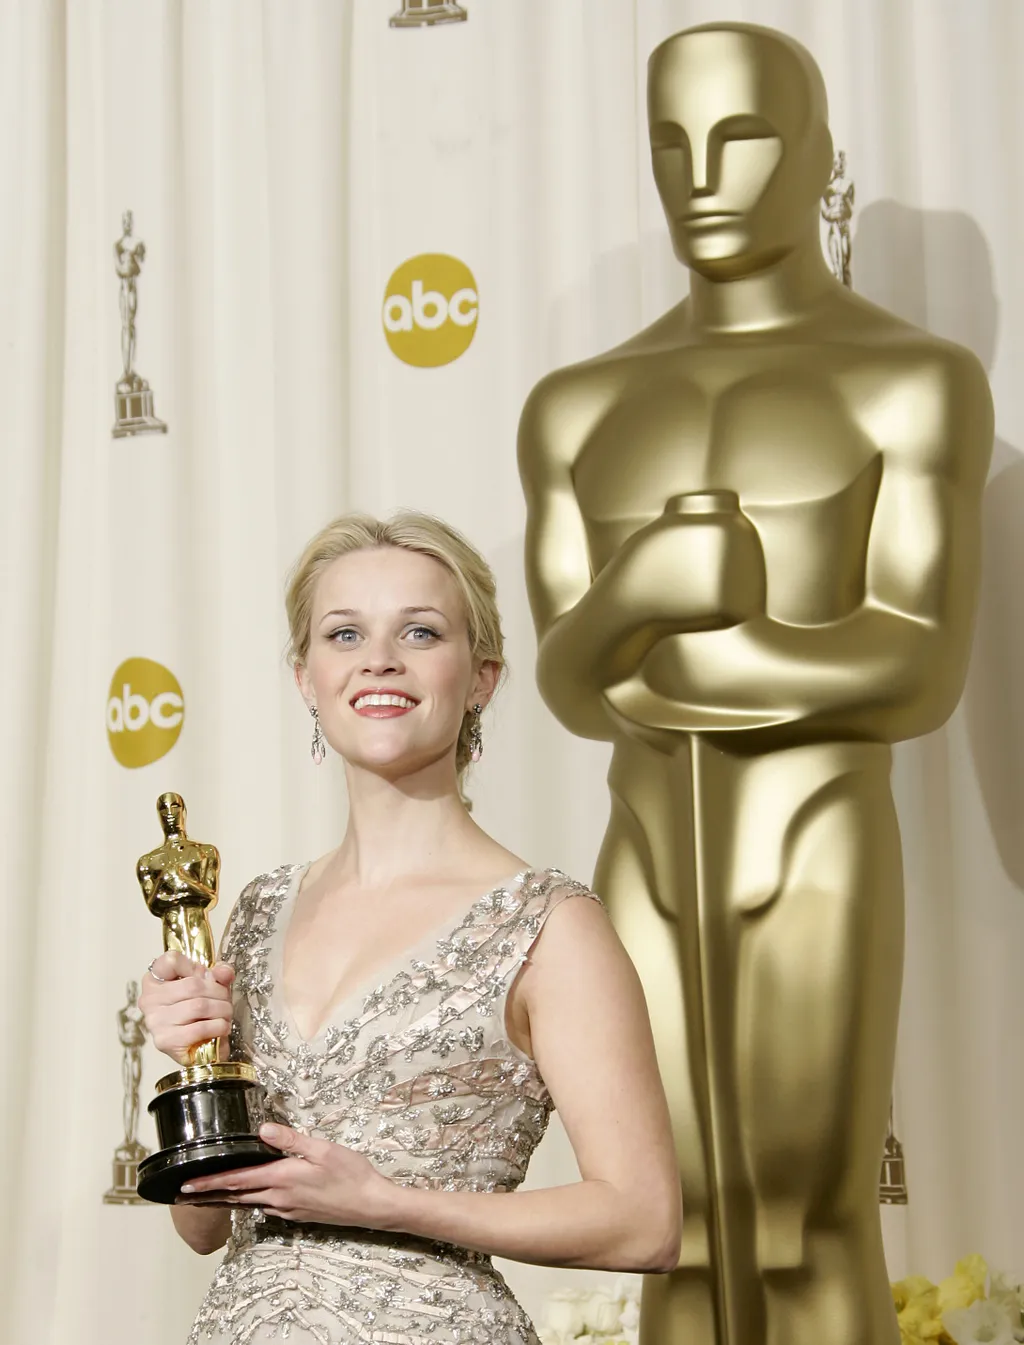 56947995 Vertical SMILING ACADEMY AWARDS FRONT VIEW PORTRAIT TROPHY PRIZEGIVING CINEMA AWARD ACTRESS STATUE 